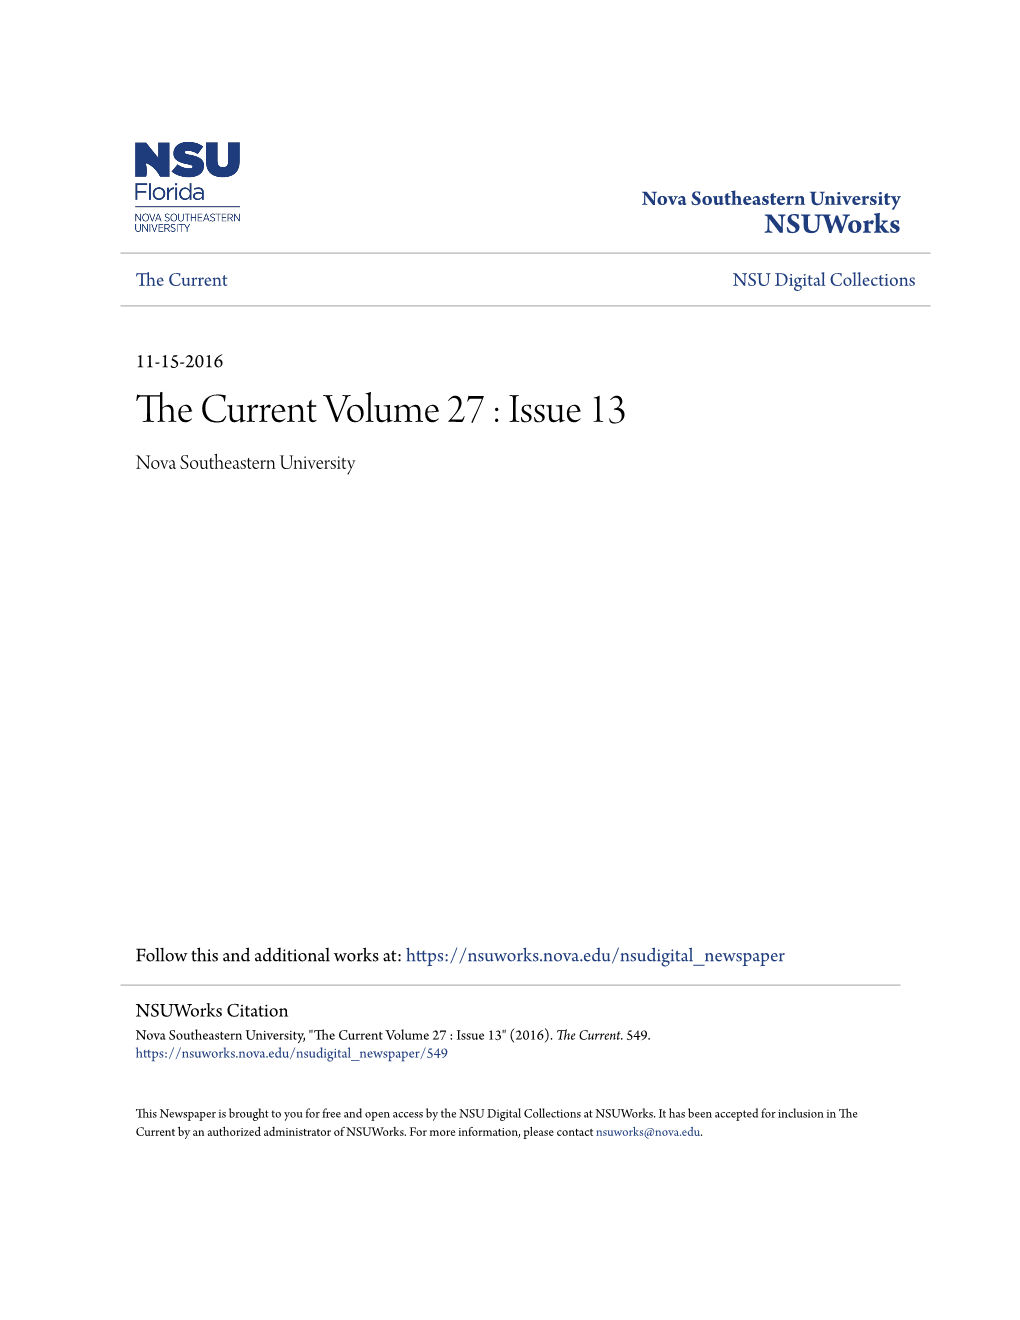 The Current Volume 27 : Issue 13